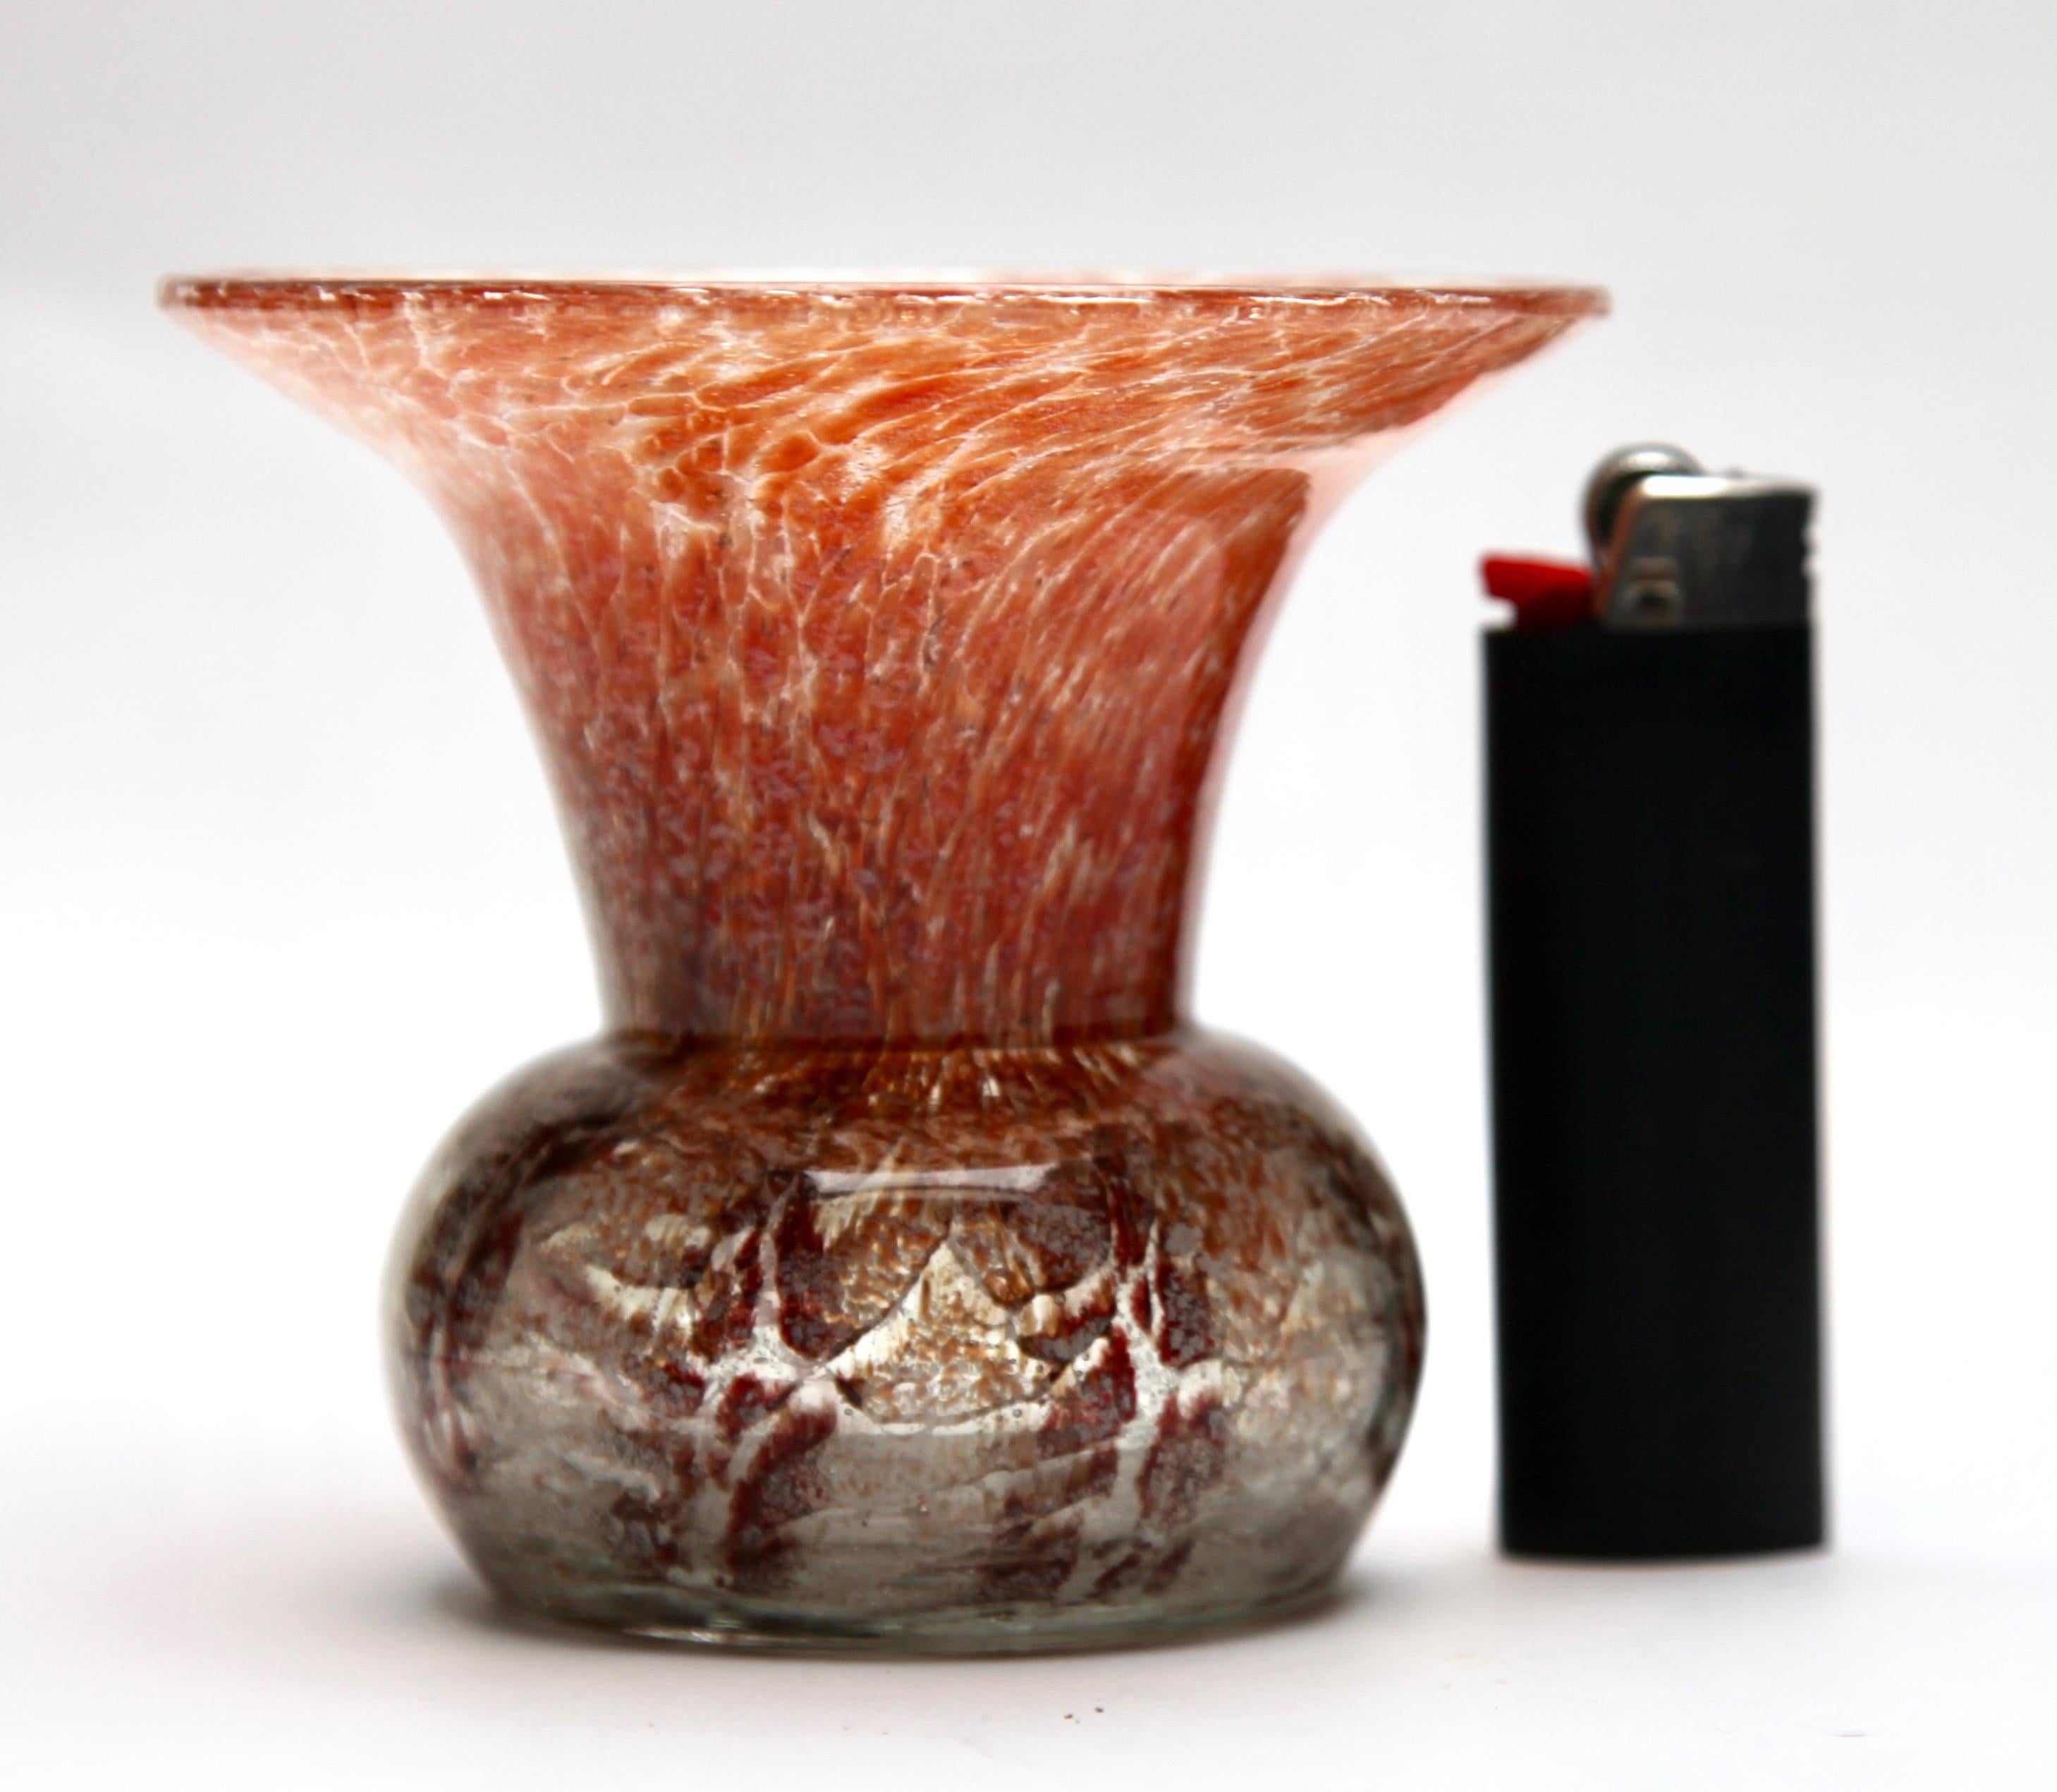 'Ikora' Art Glass Vase, Produced, by WMF in Germany, 1930s by Karl Wiedmann For Sale 1